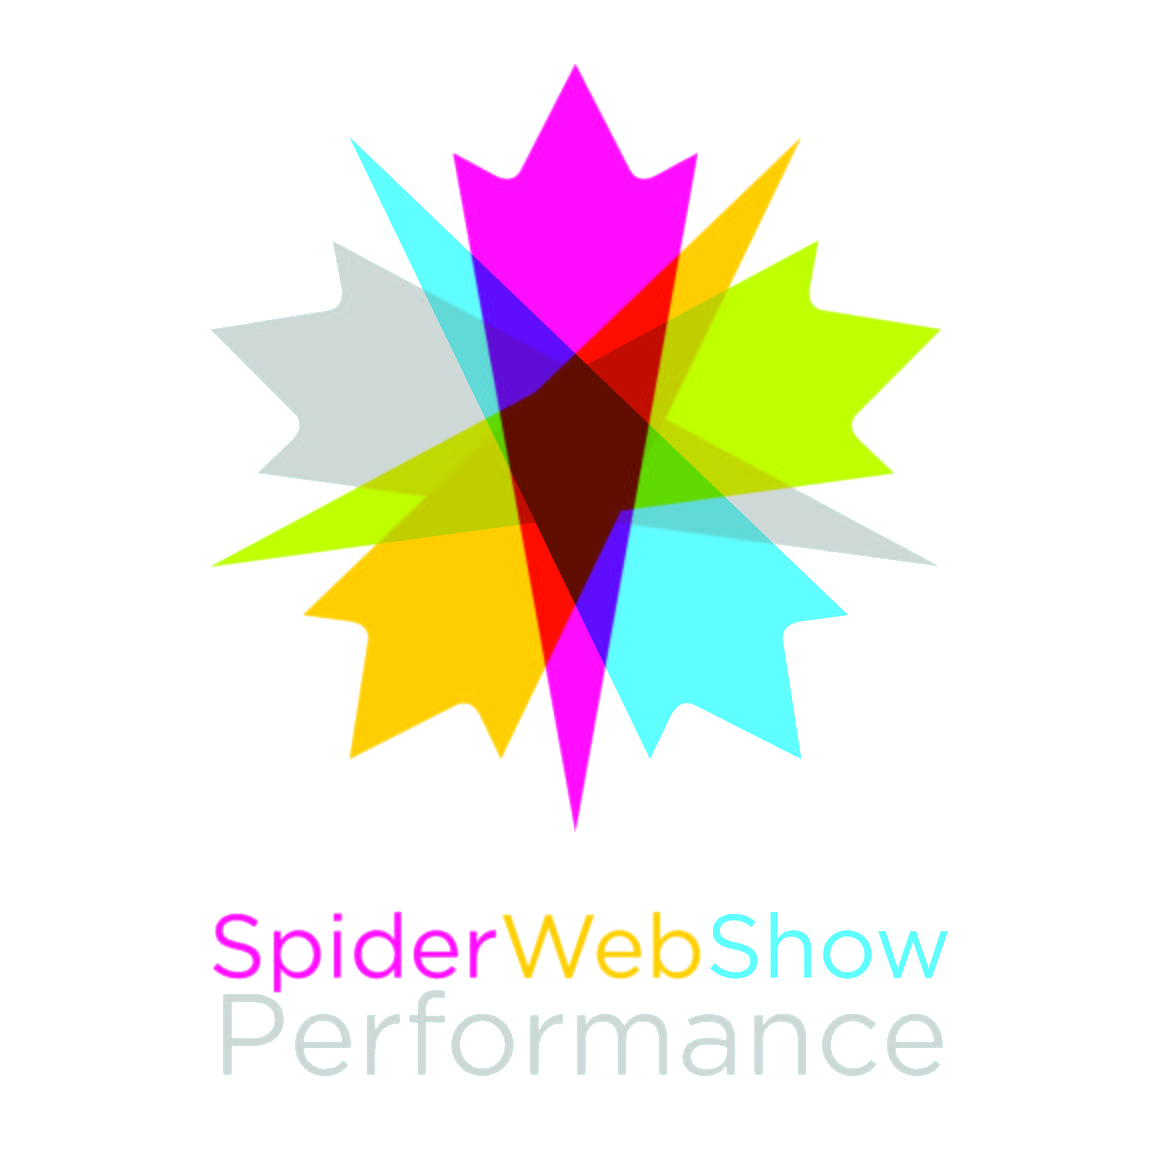 SpiderWebShow Performance - A Multicolour star made of intersected 4 point arrows, each arrow having a colour. Clockwise it is Purple, Orange, Green,Grey, and Blue.